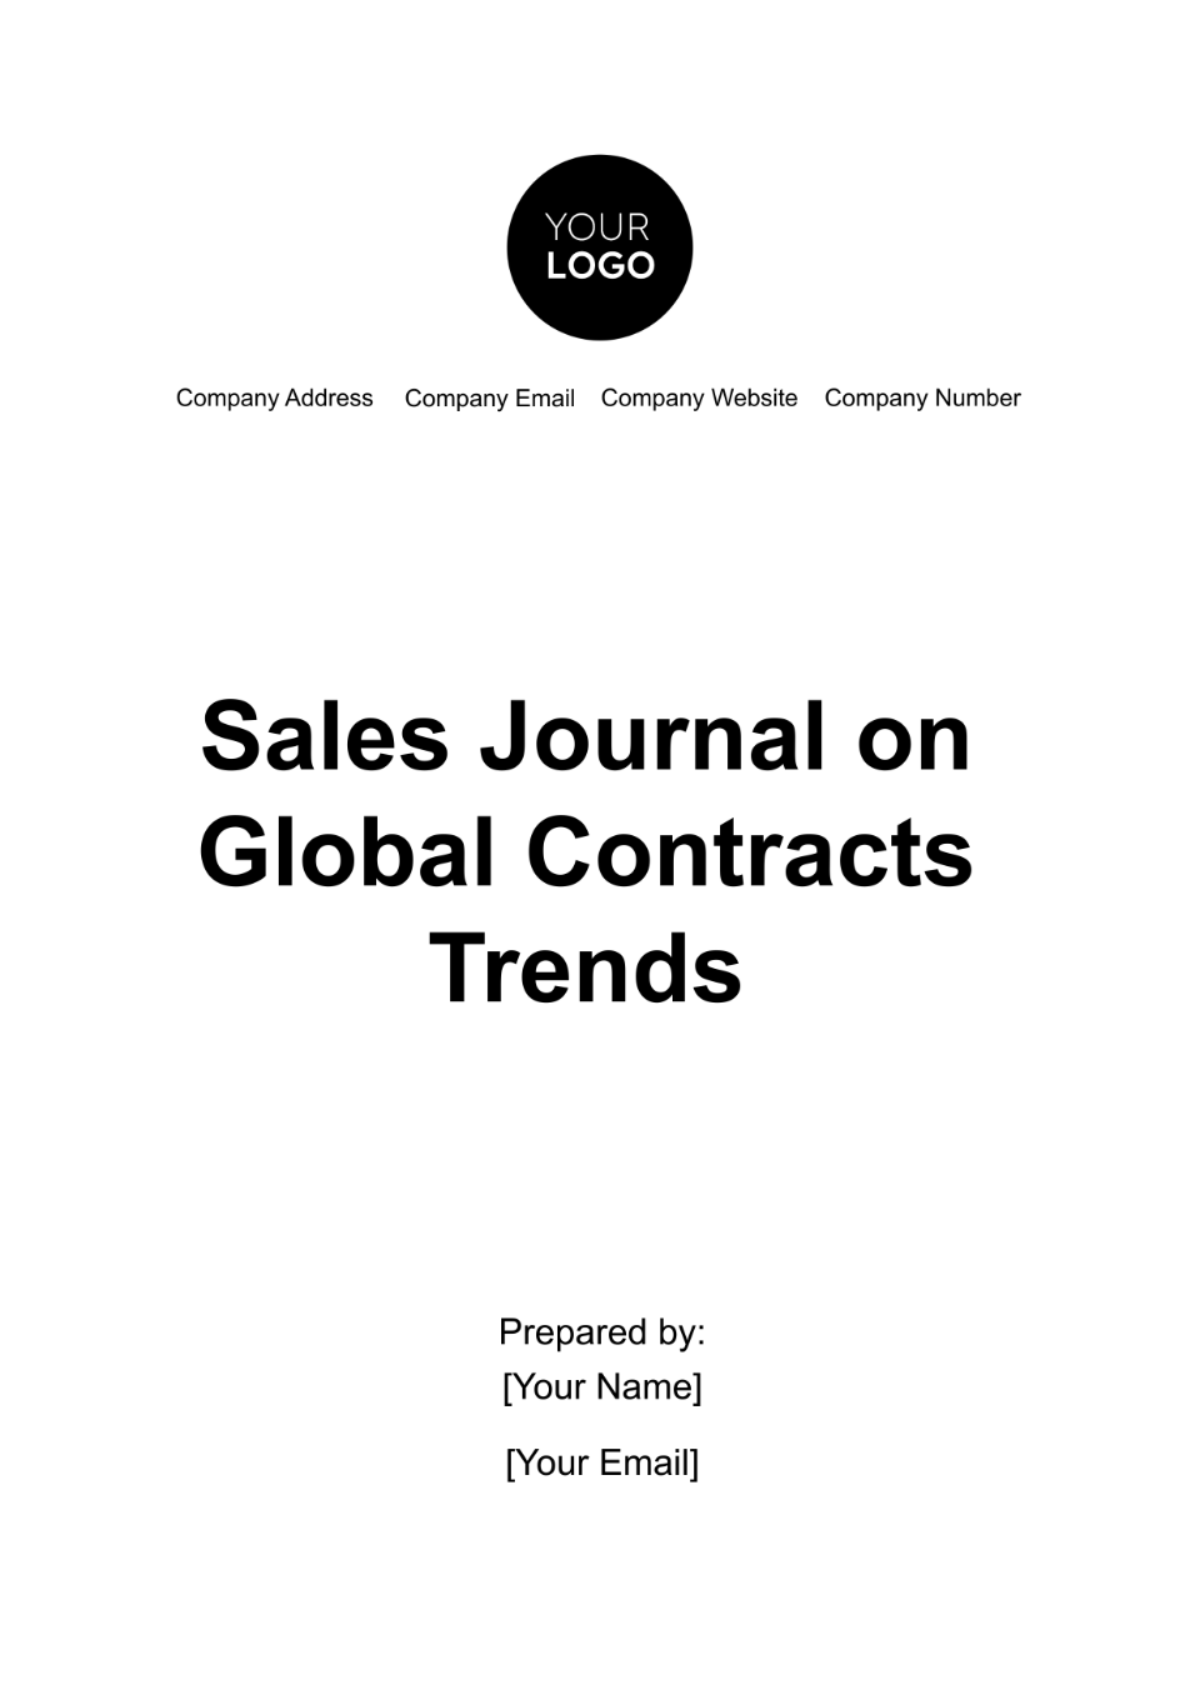 Free Sales Journal on Global Contracts Trends Template